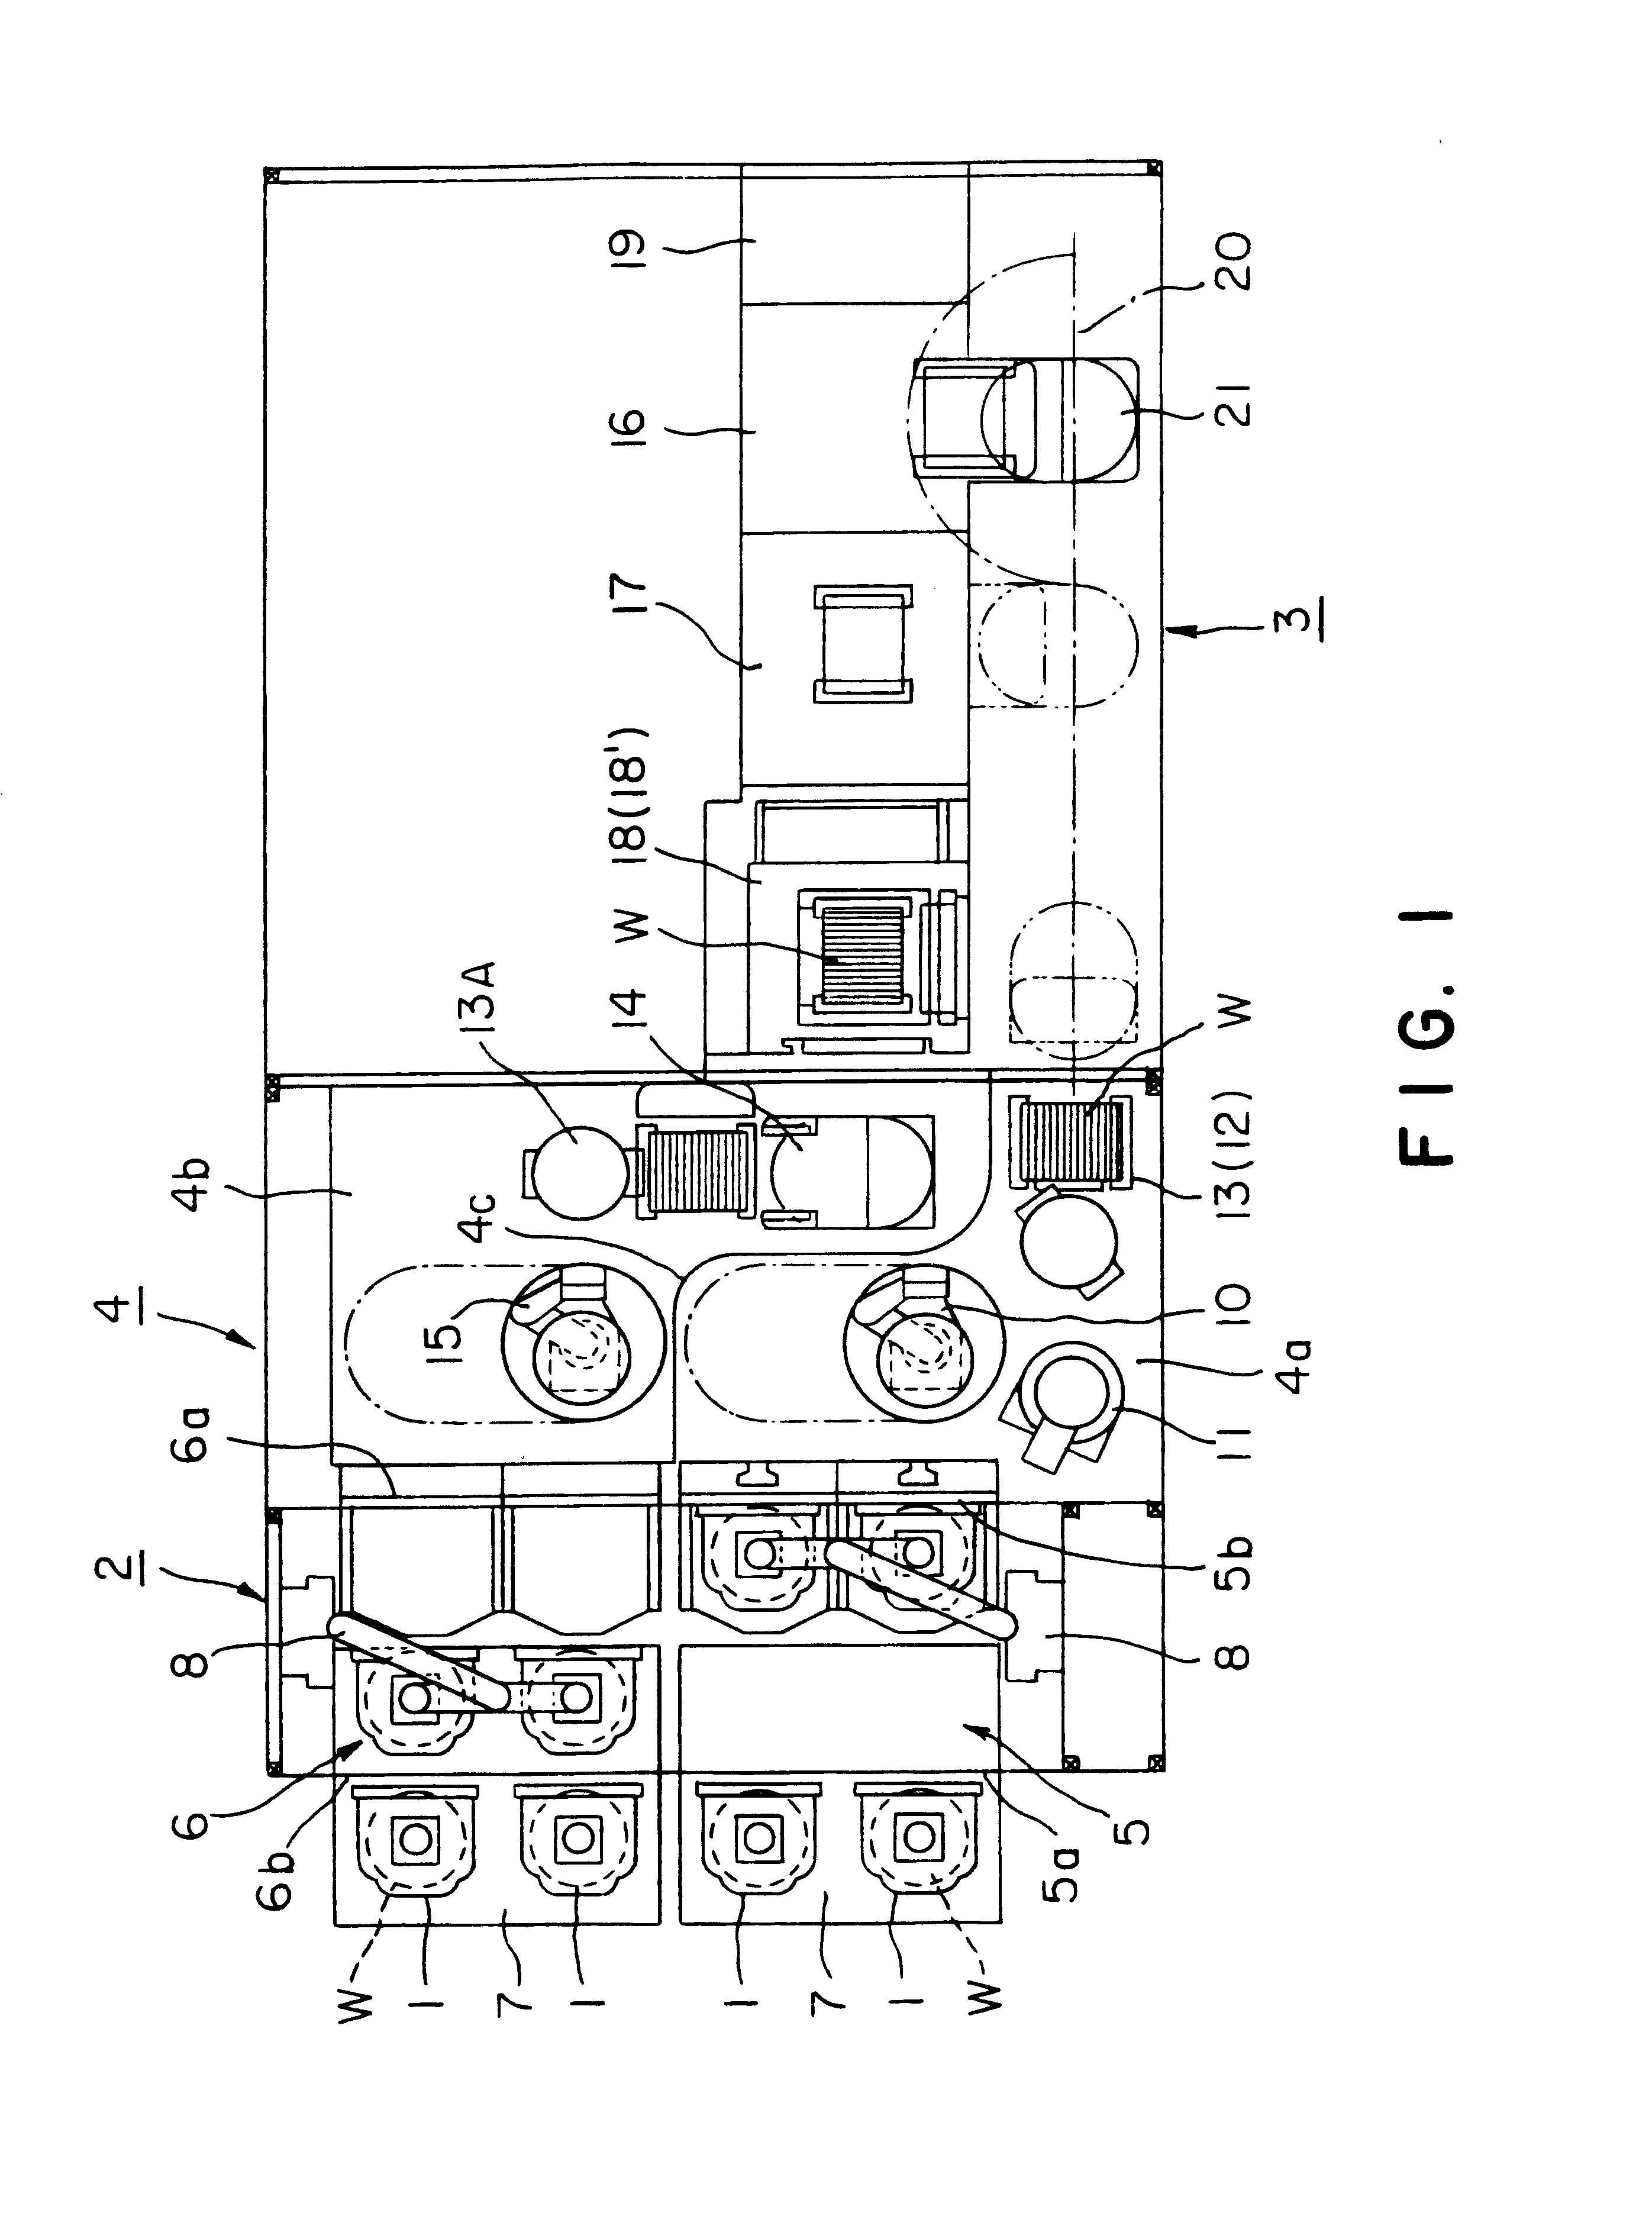 Cleaning and drying method and apparatus